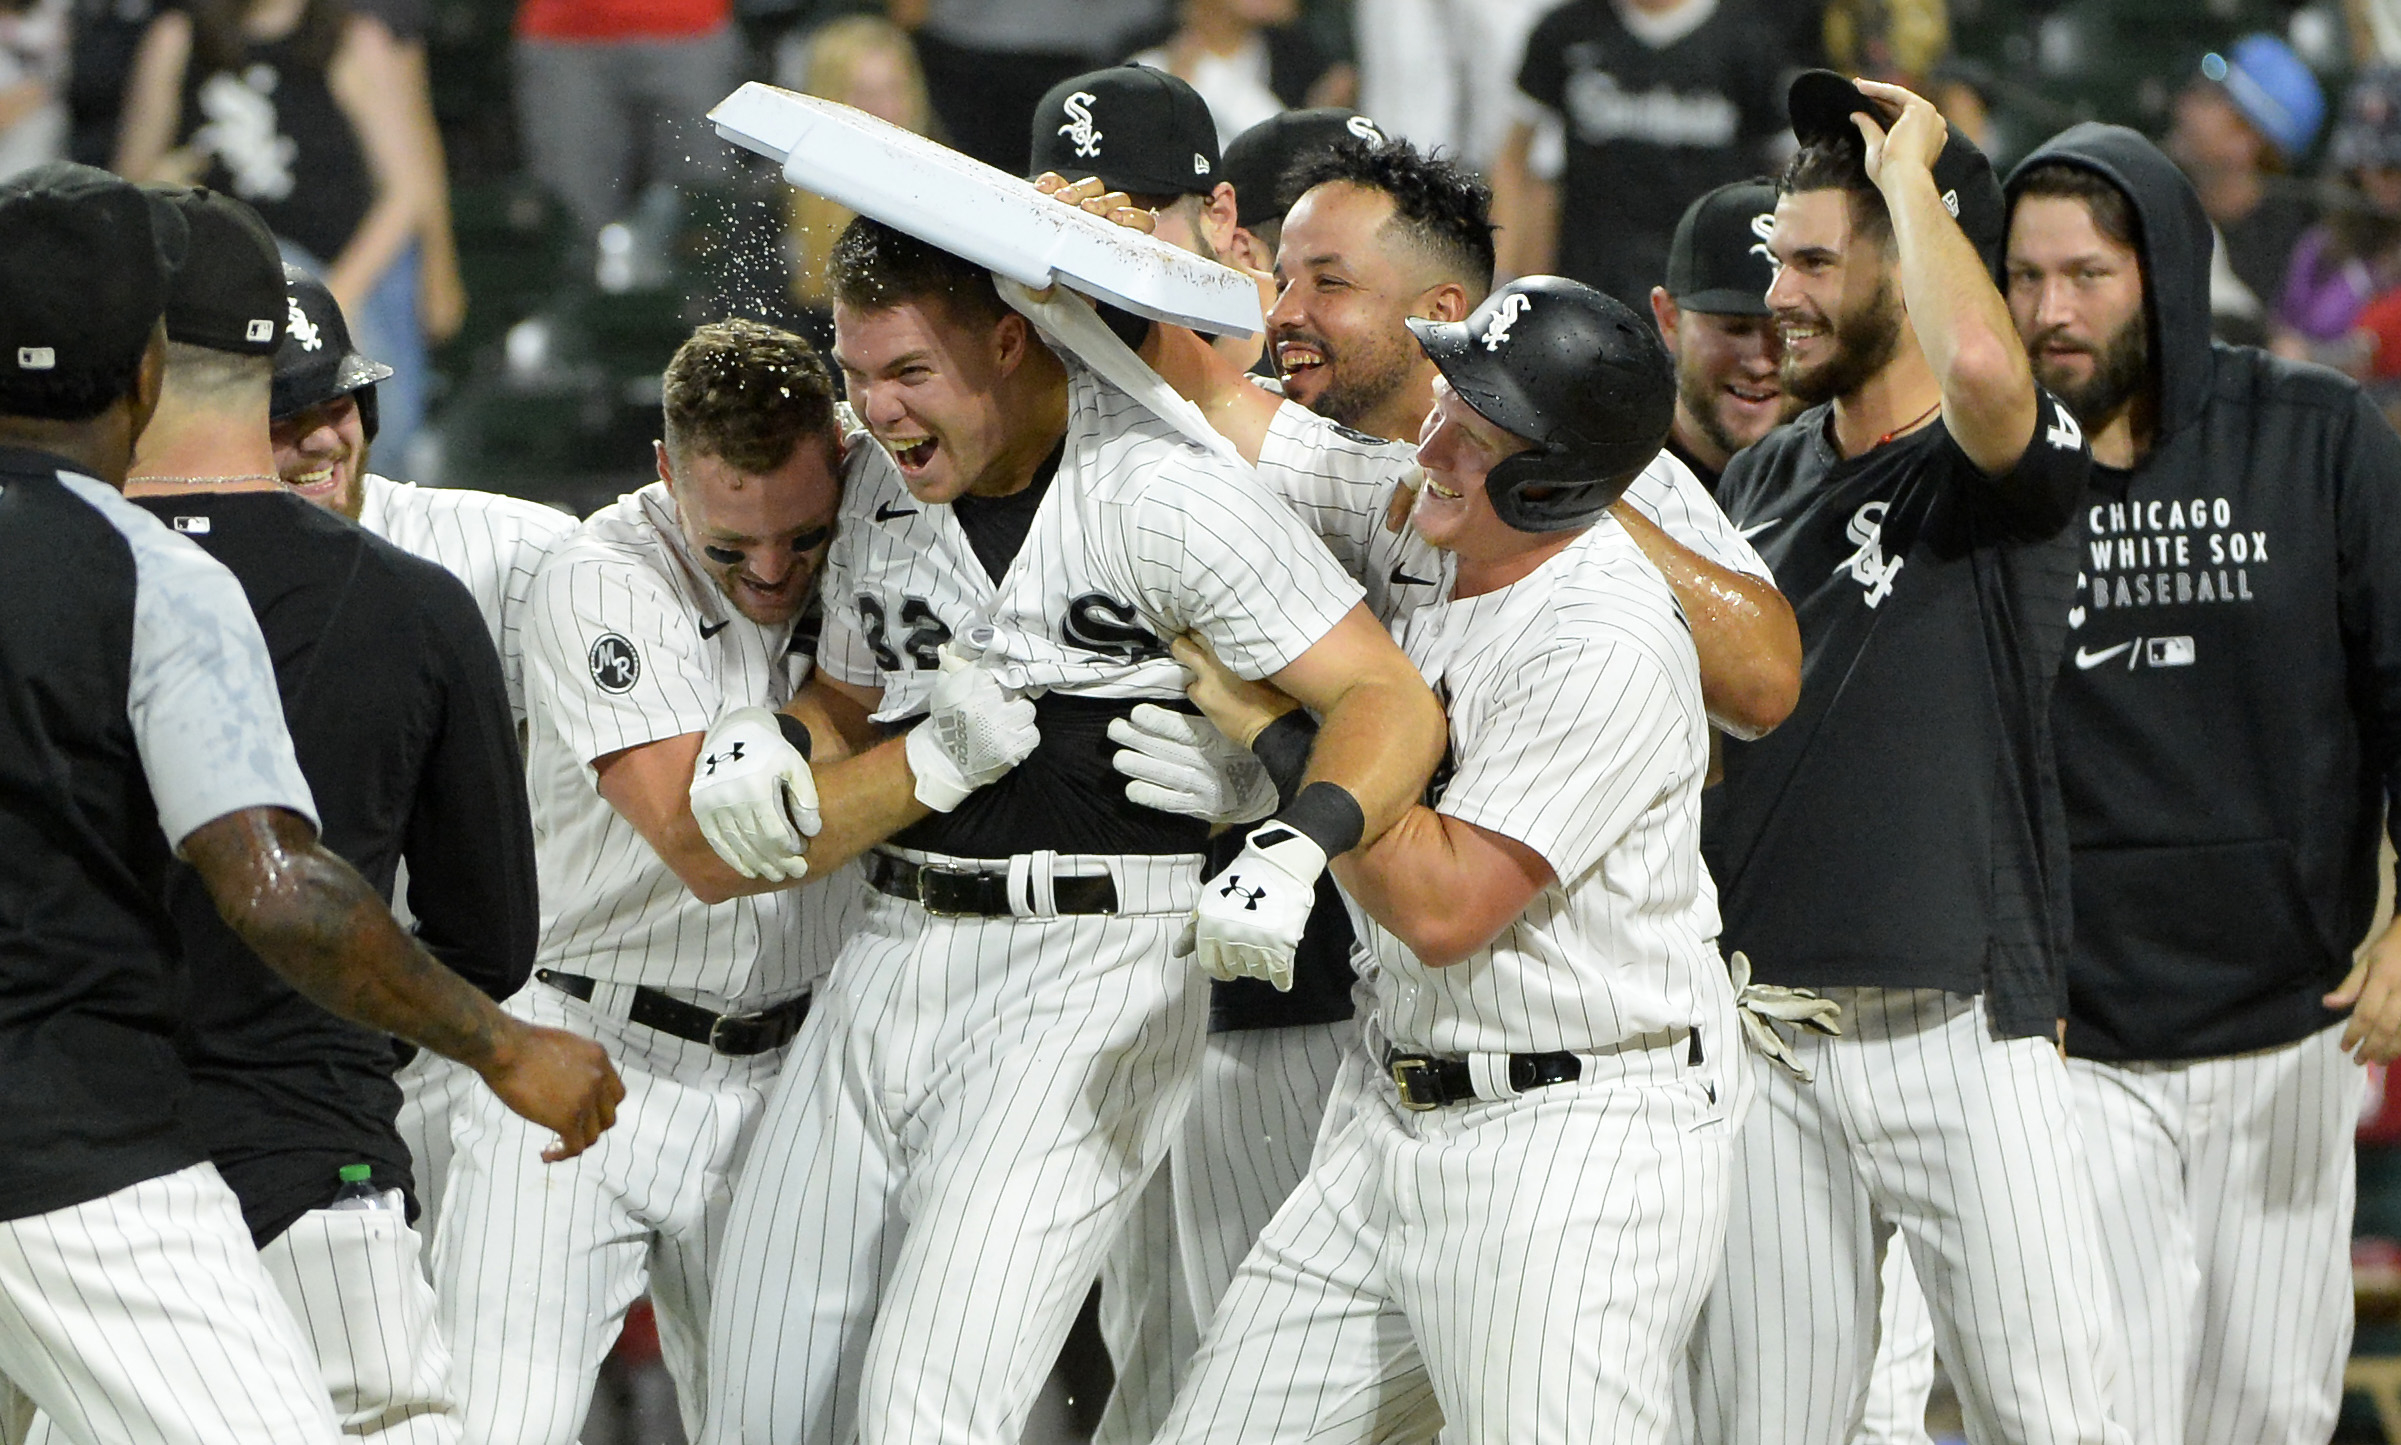 When Did the Chicago White Sox Last Win a World Series?